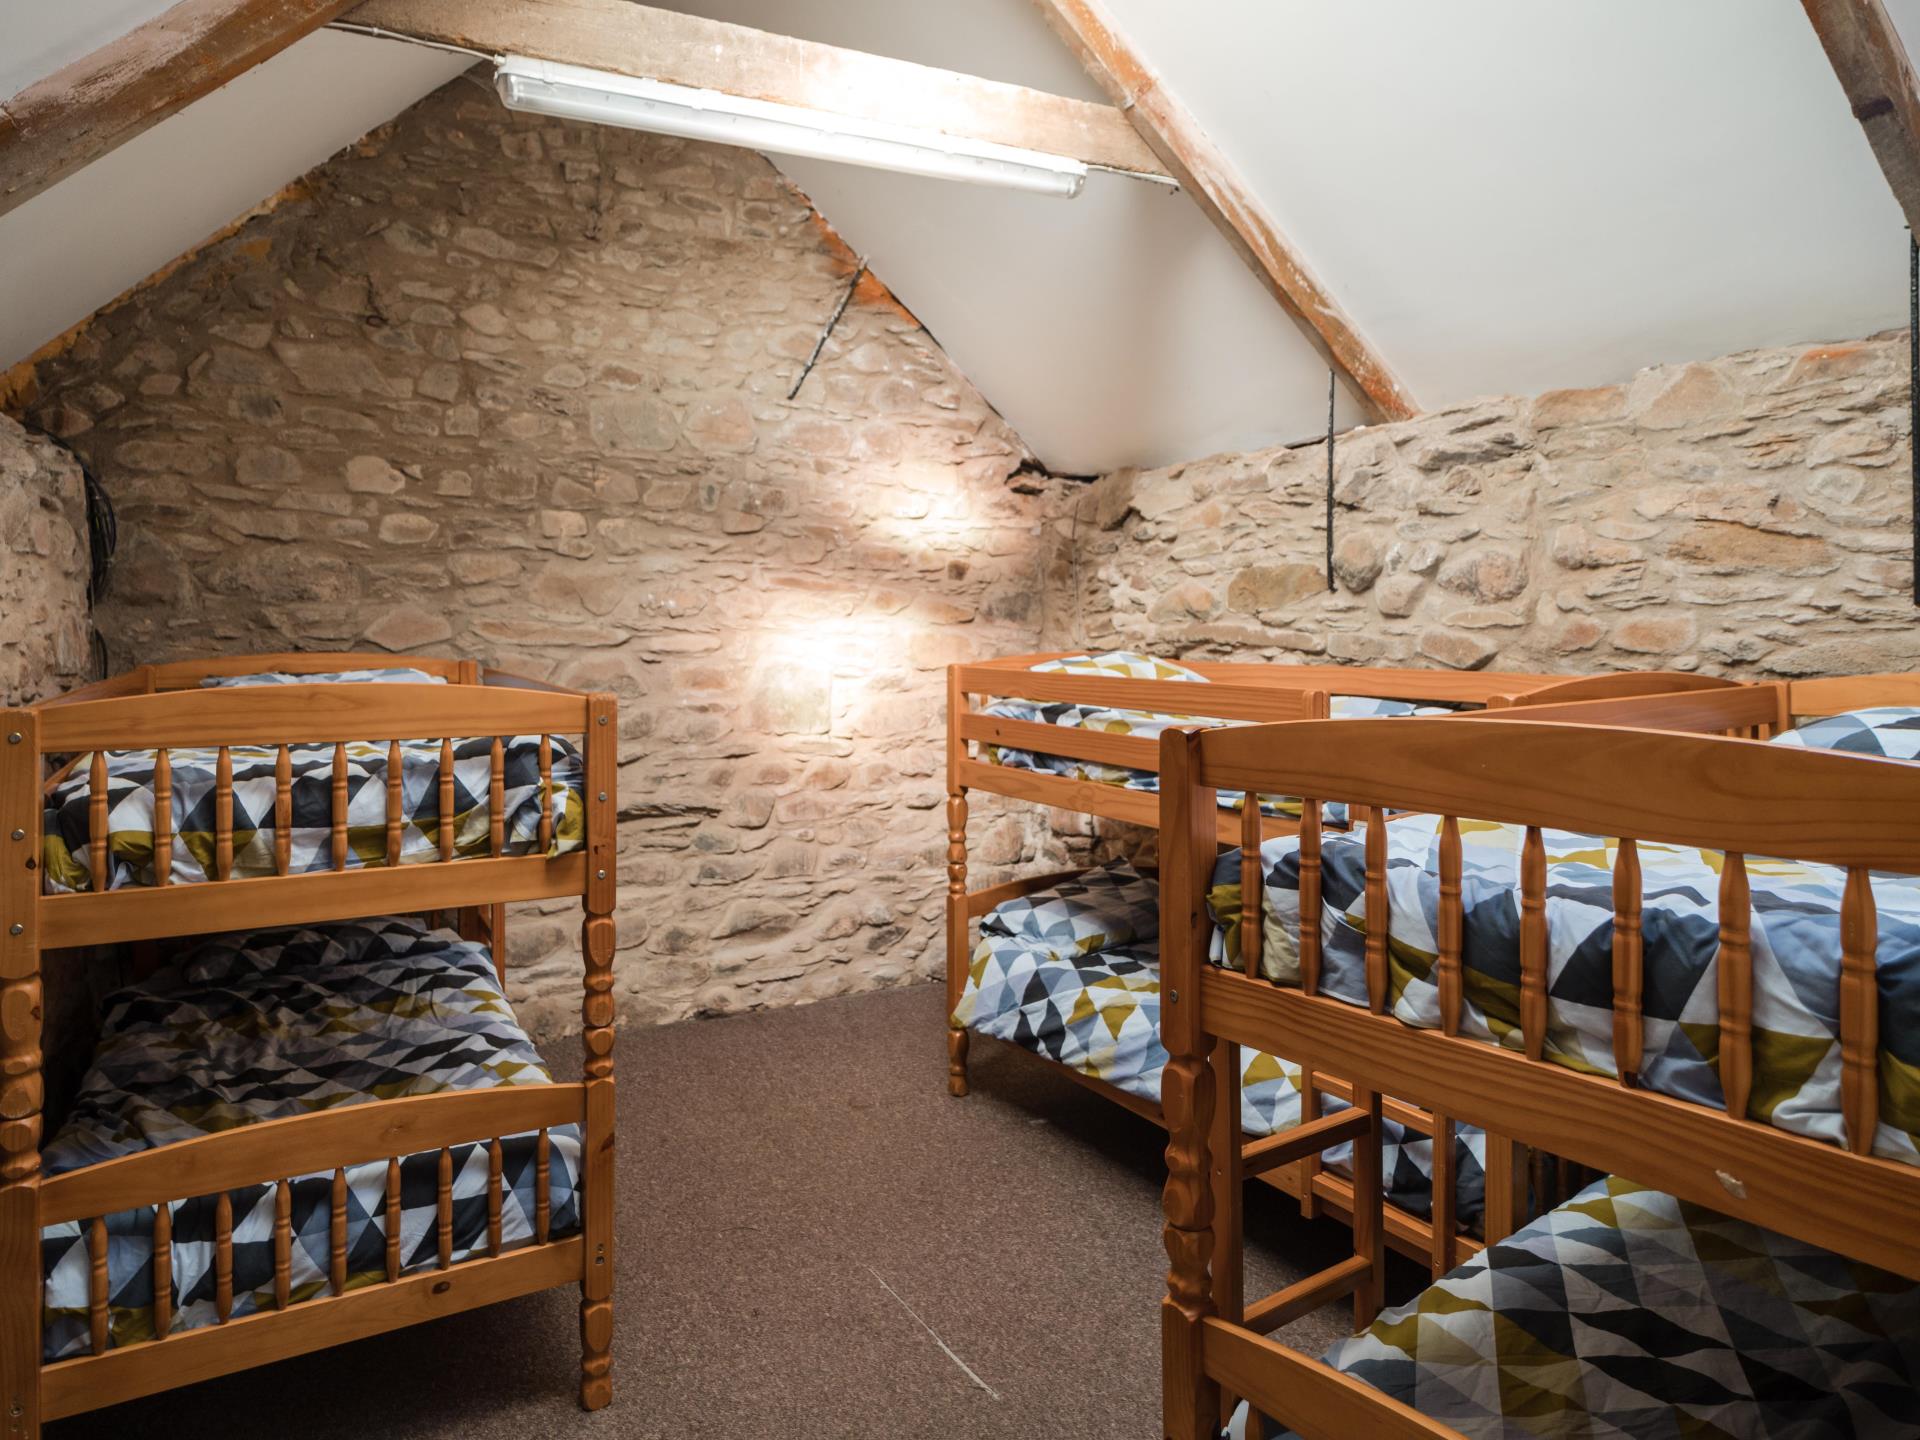 We have small bunkhouse accommodation